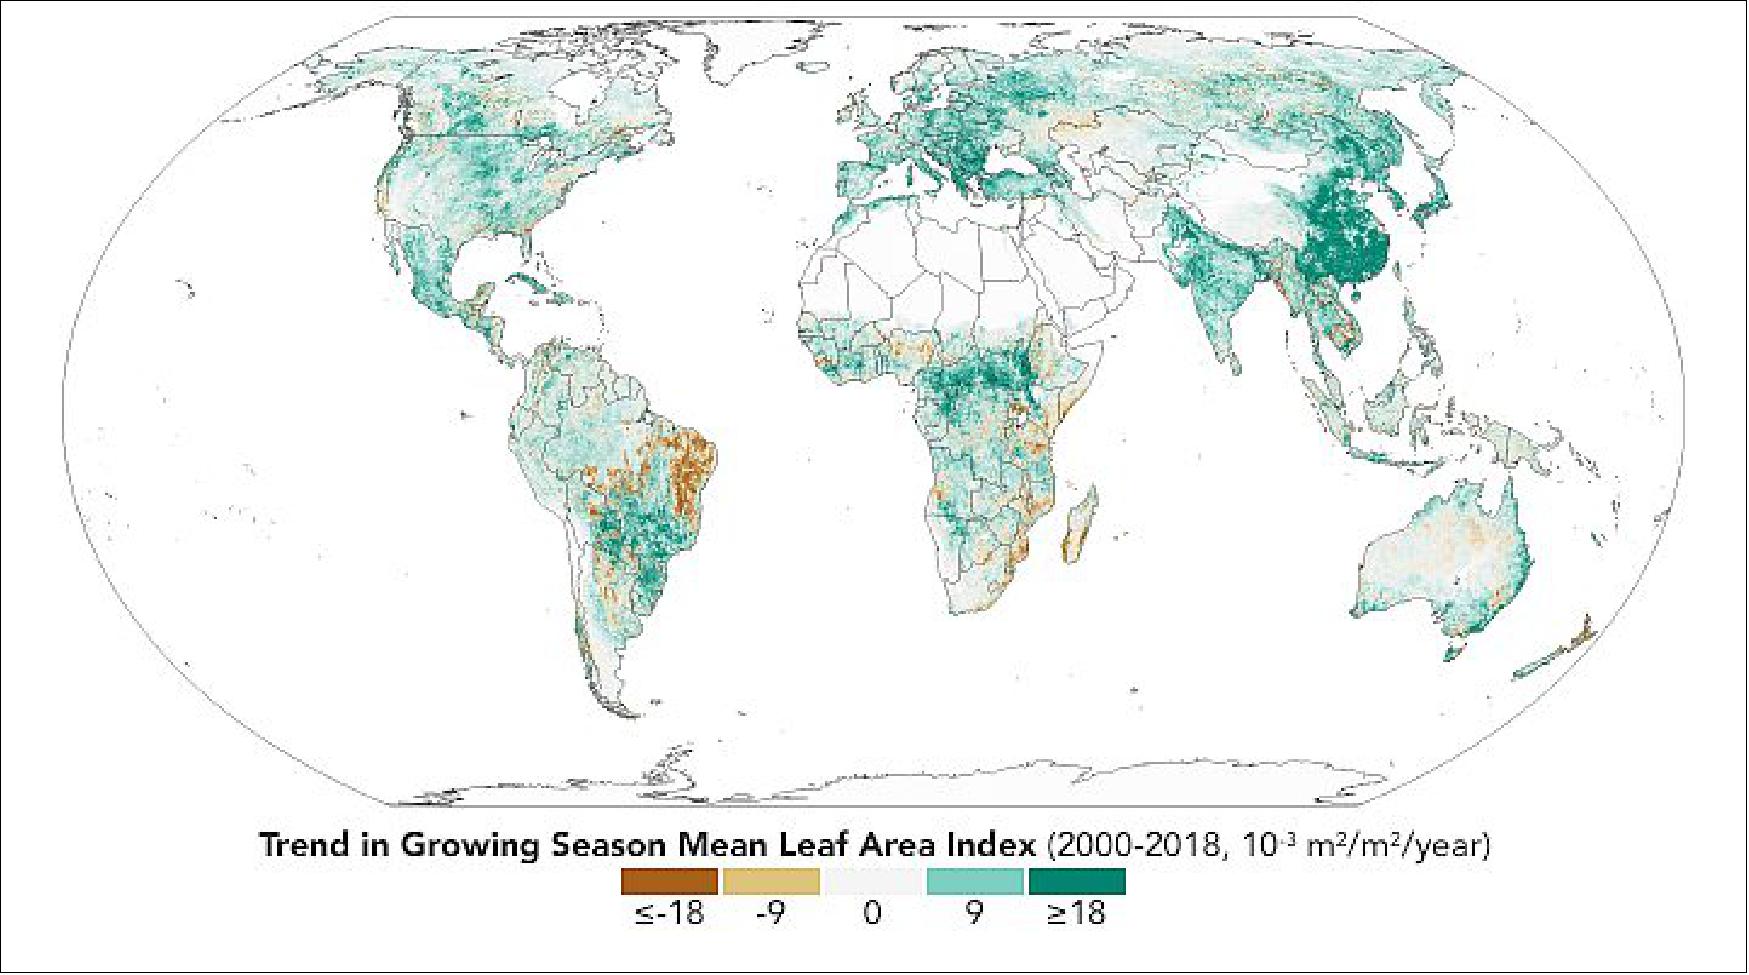 Figure 91: This map shows where greenness increased (green) and decreased (brown) across the planet between 2000 and 2018. Specifically, it shows the trend in the "leaf area index"—the amount of leaf area relative to ground area—during the growing season. The index is computed using data from the MODIS instrument on NASA's Terra and Aqua satellites. White areas are where the land is barren, built upon, or covered with ice, wetlands, or water (image credit: NASA Earth Observatory, image by Joshua Stevens, using data from Shilong, P., et al. (2020). Story by Kathryn Hansen)